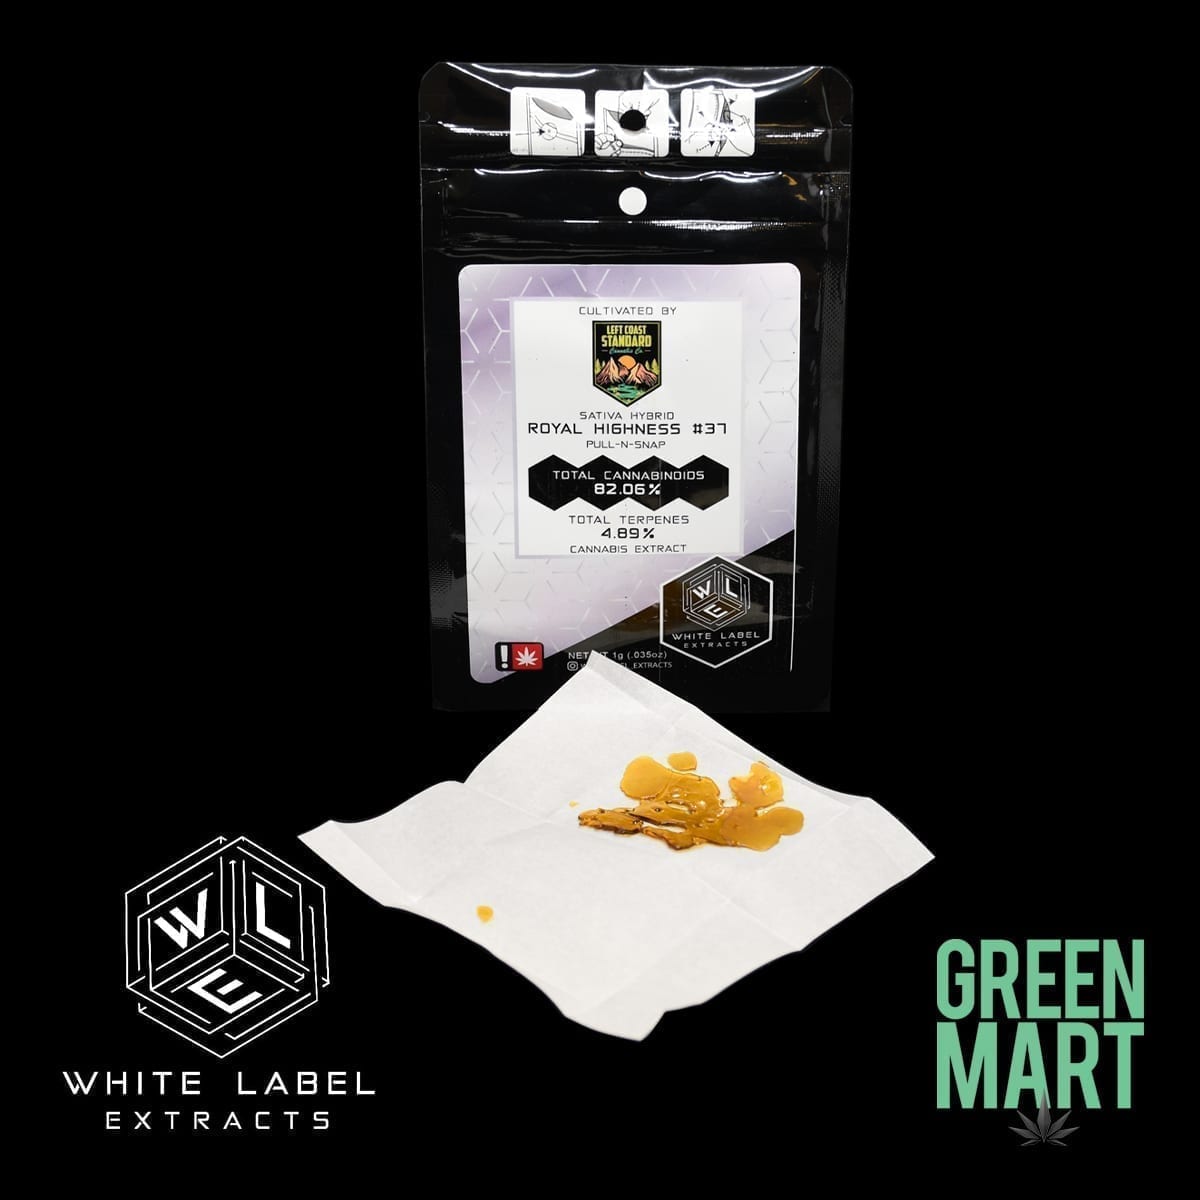 White Label Extracts - Royal Highness #37